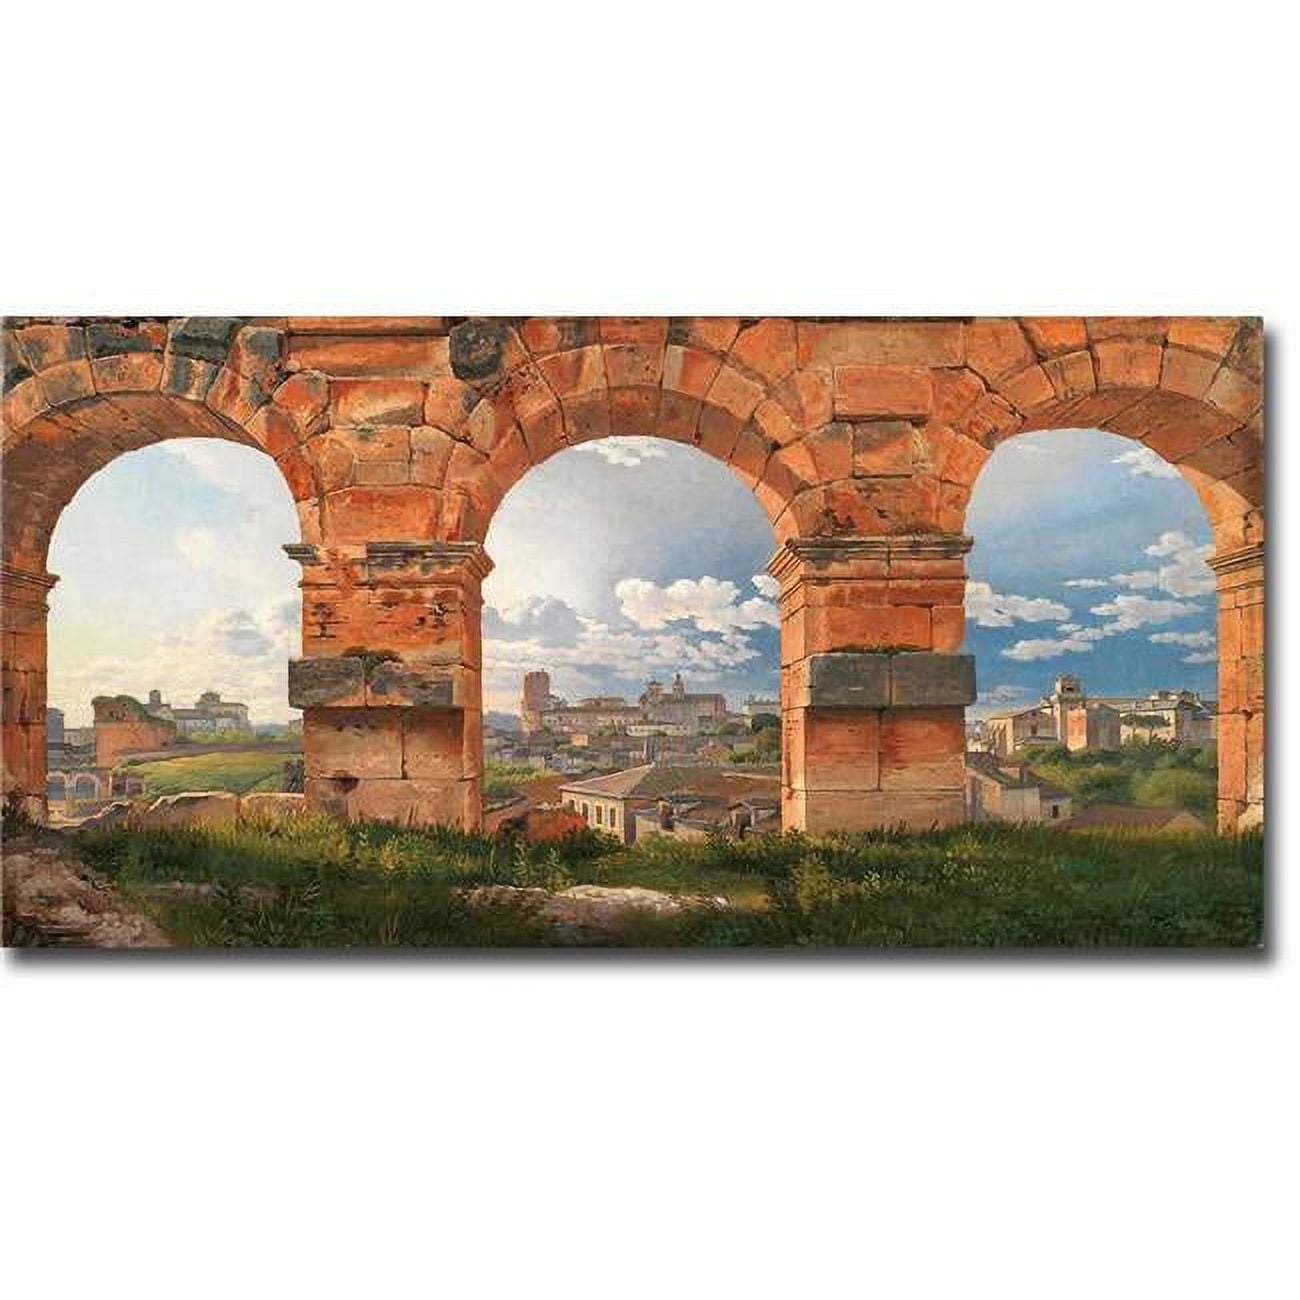 PerfectPillows A View through The Arches of The Colosseum Rome by Christoffer Wilhelm Eckersberg Premium Gallery Wrapped Canvas Giclee Art - Re